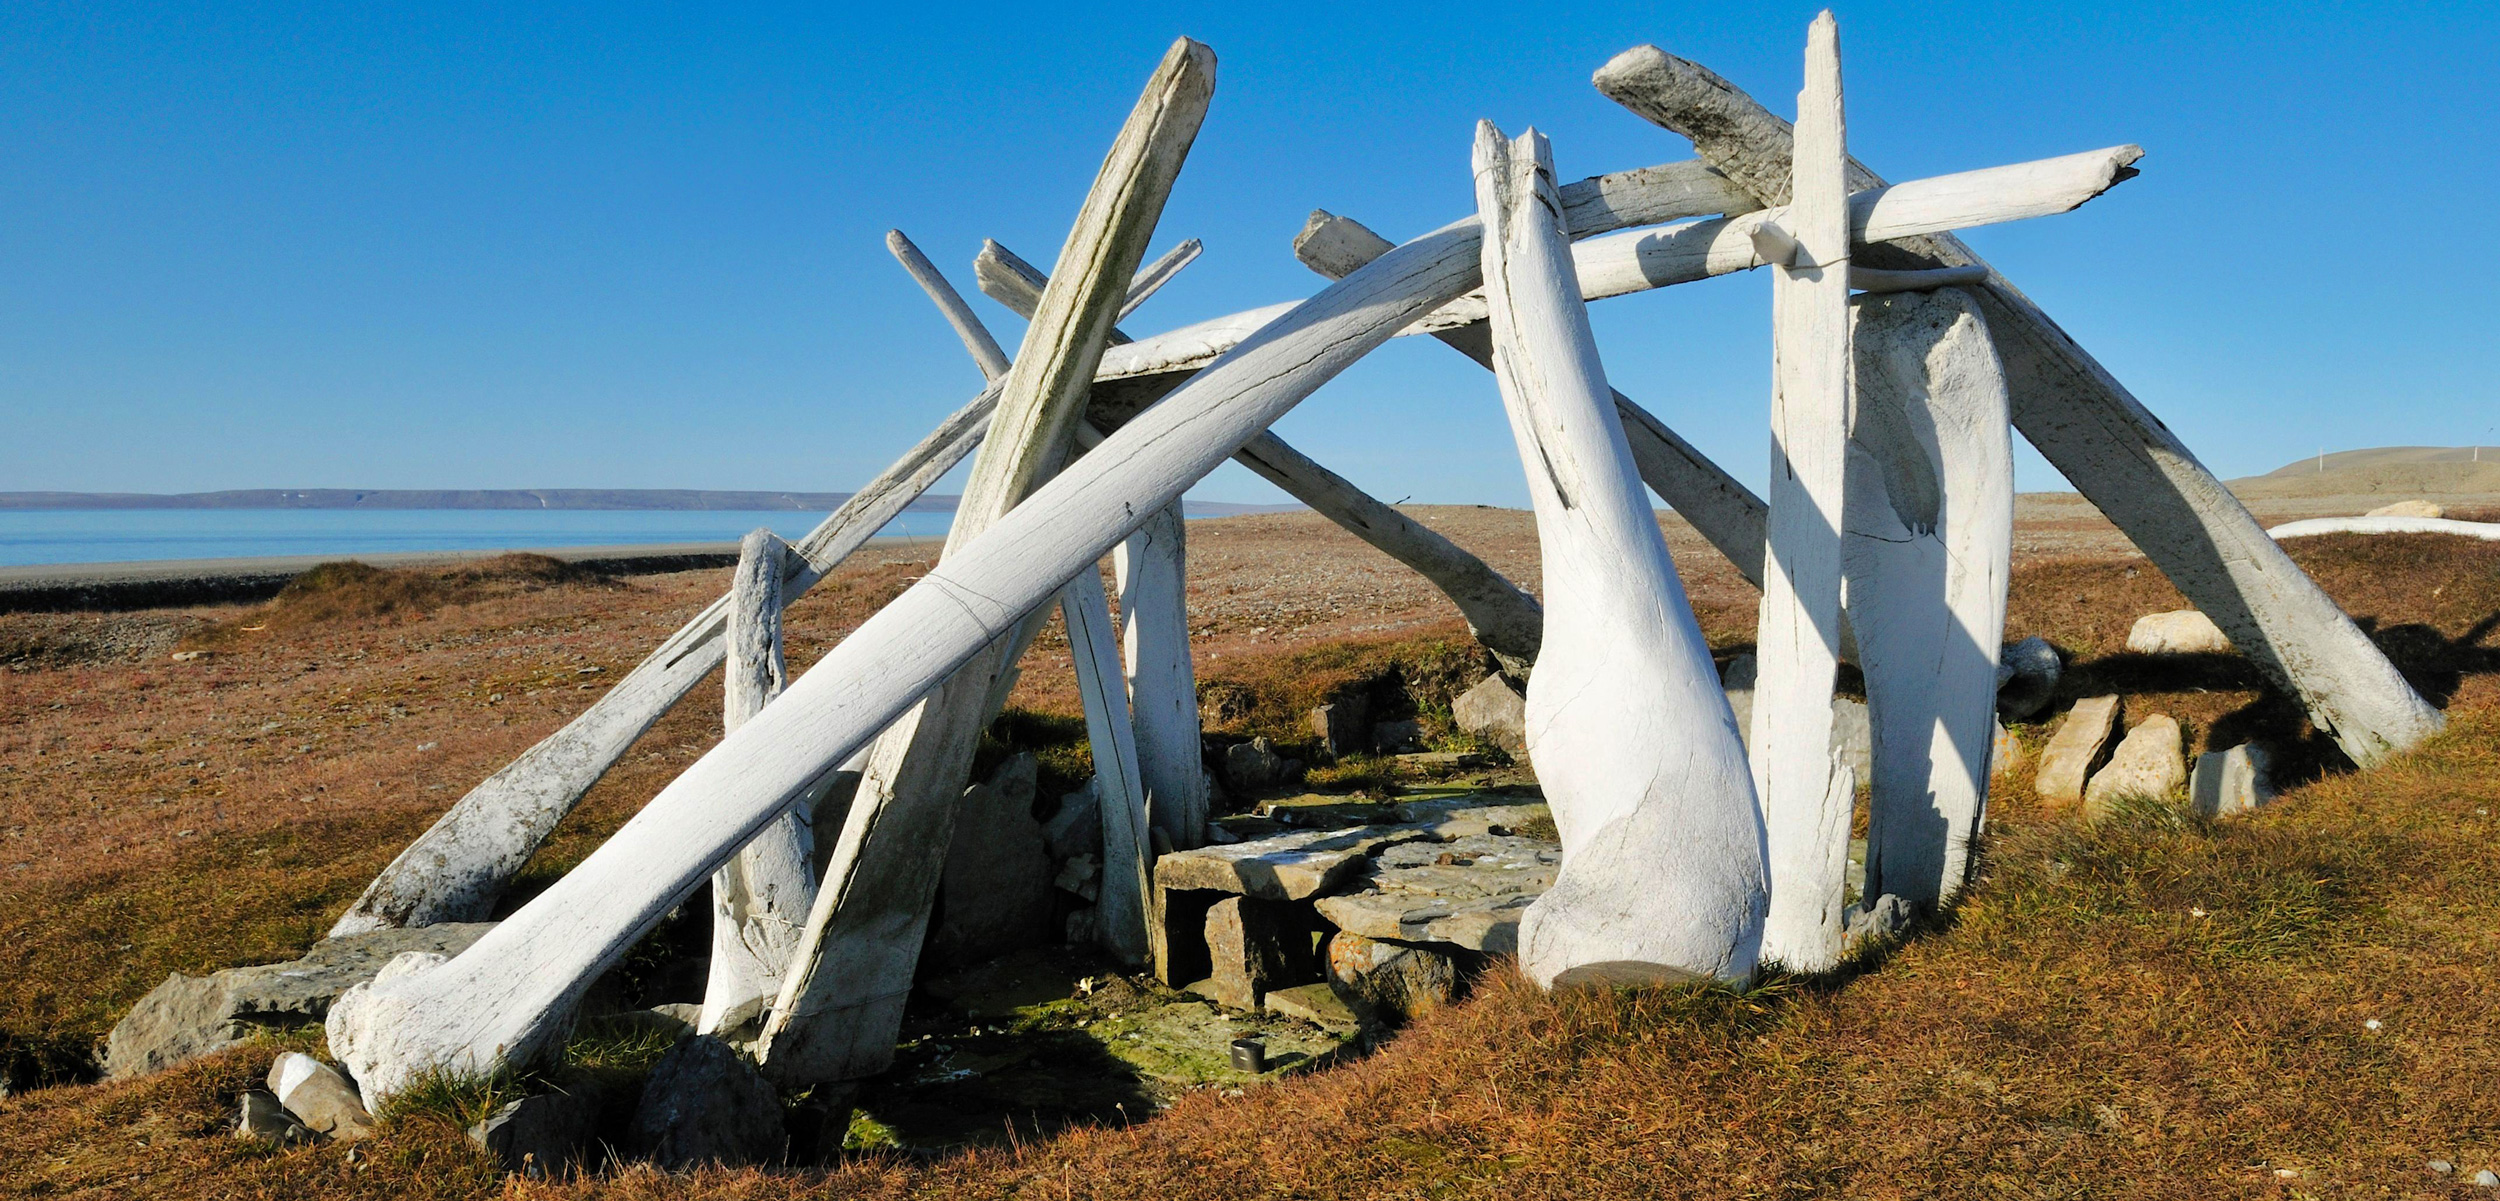 This replica whale bone house on Cornwallis Island, Nunavut, shows how the homes were constructed hundreds of years ago. Photo by age fotostock/Alamy Stock Photo